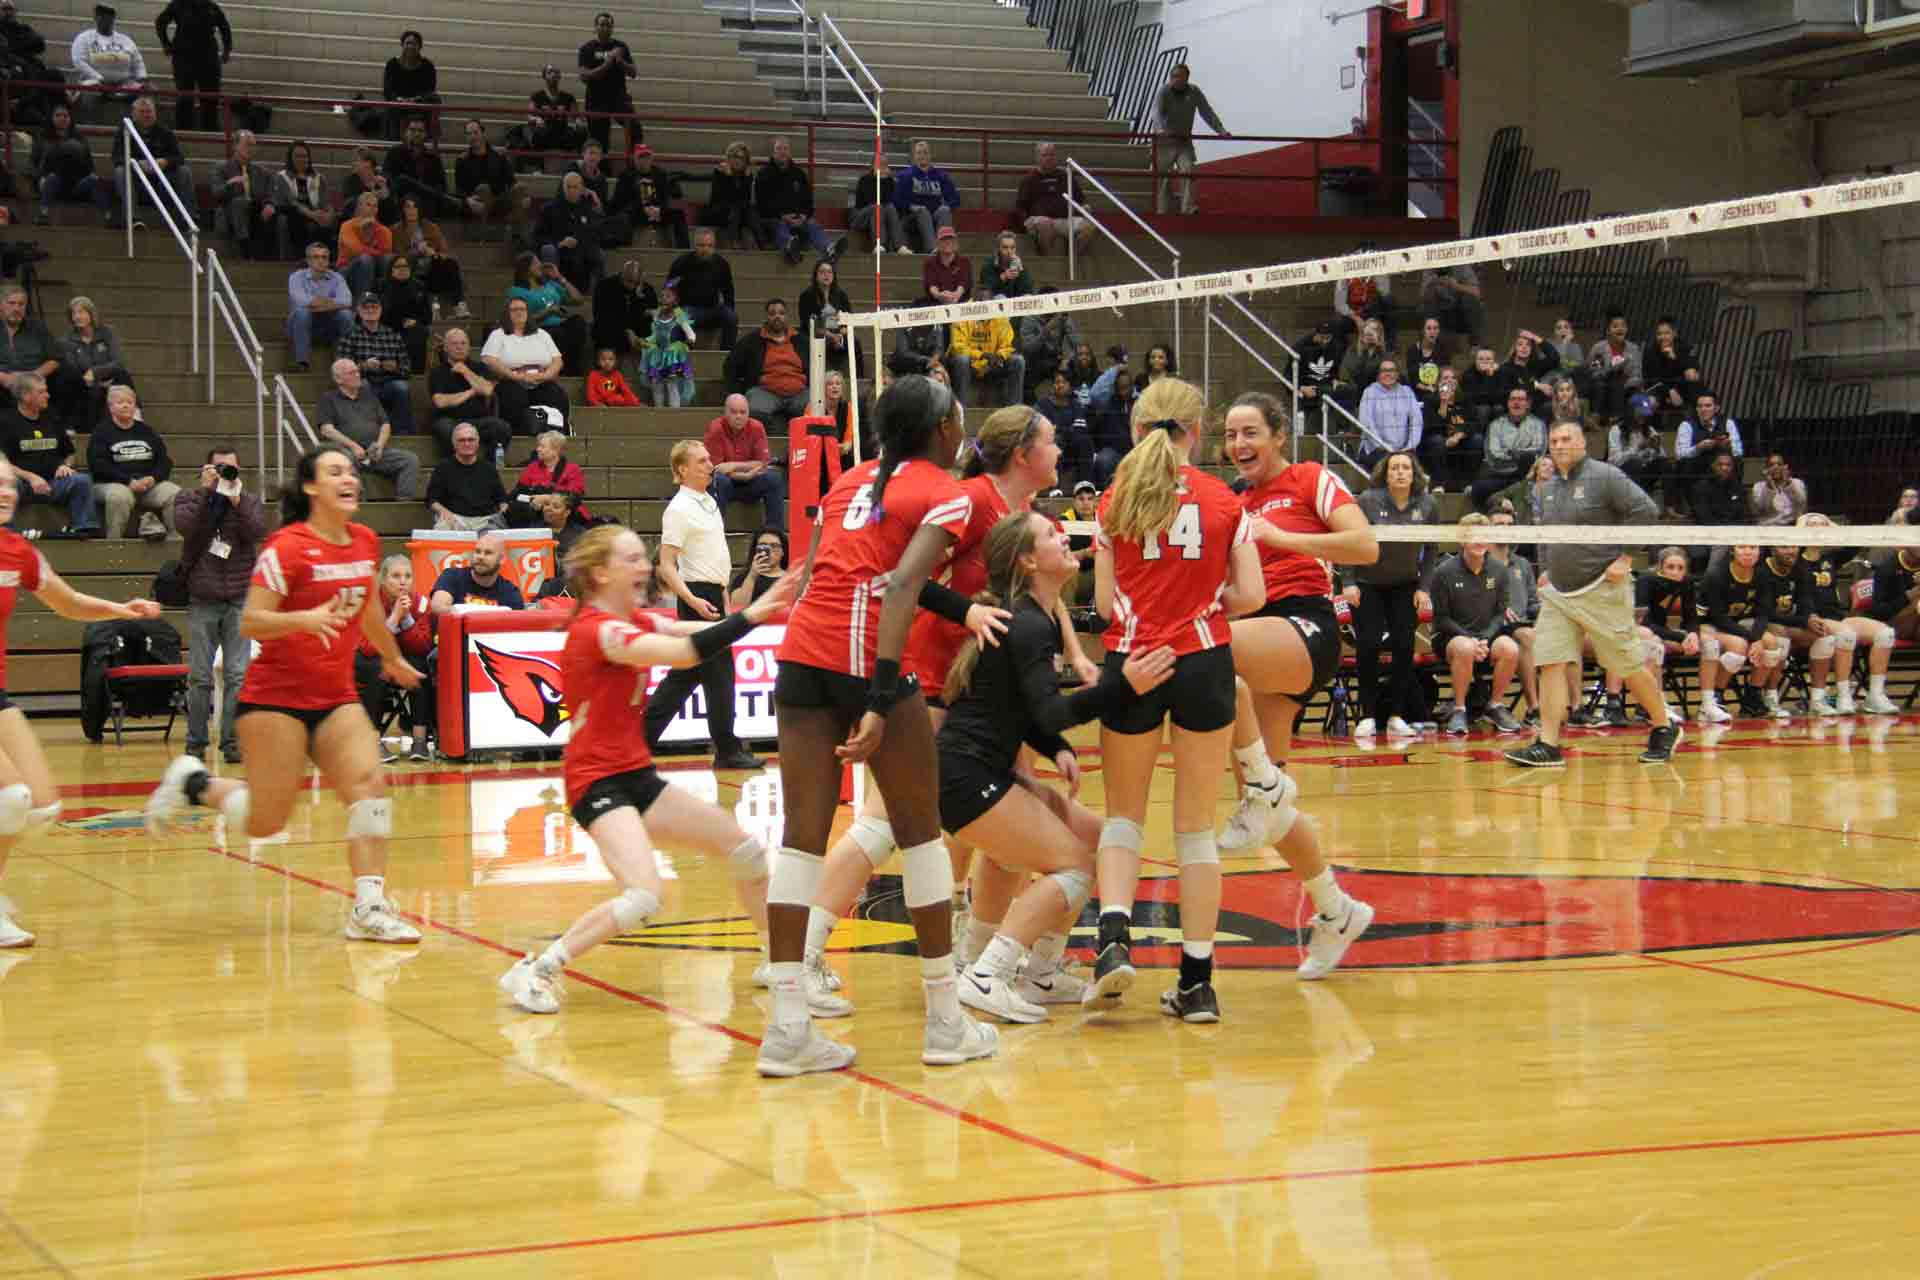 volleyball-sectional-final-vs-marian-catholic-07